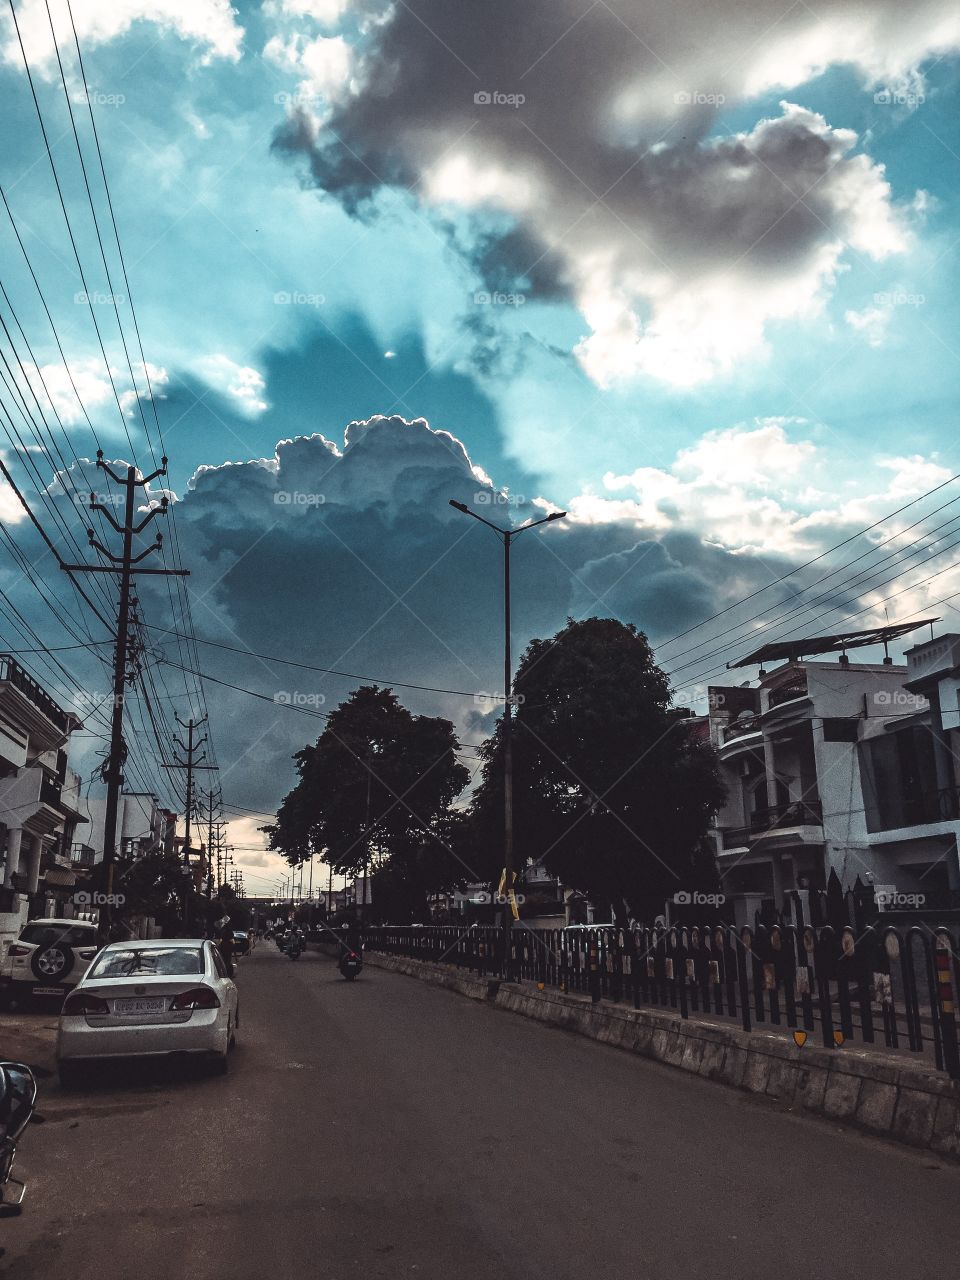 Majestic clouds reflecting through the sun behind, on a street road in India, Lucknow 